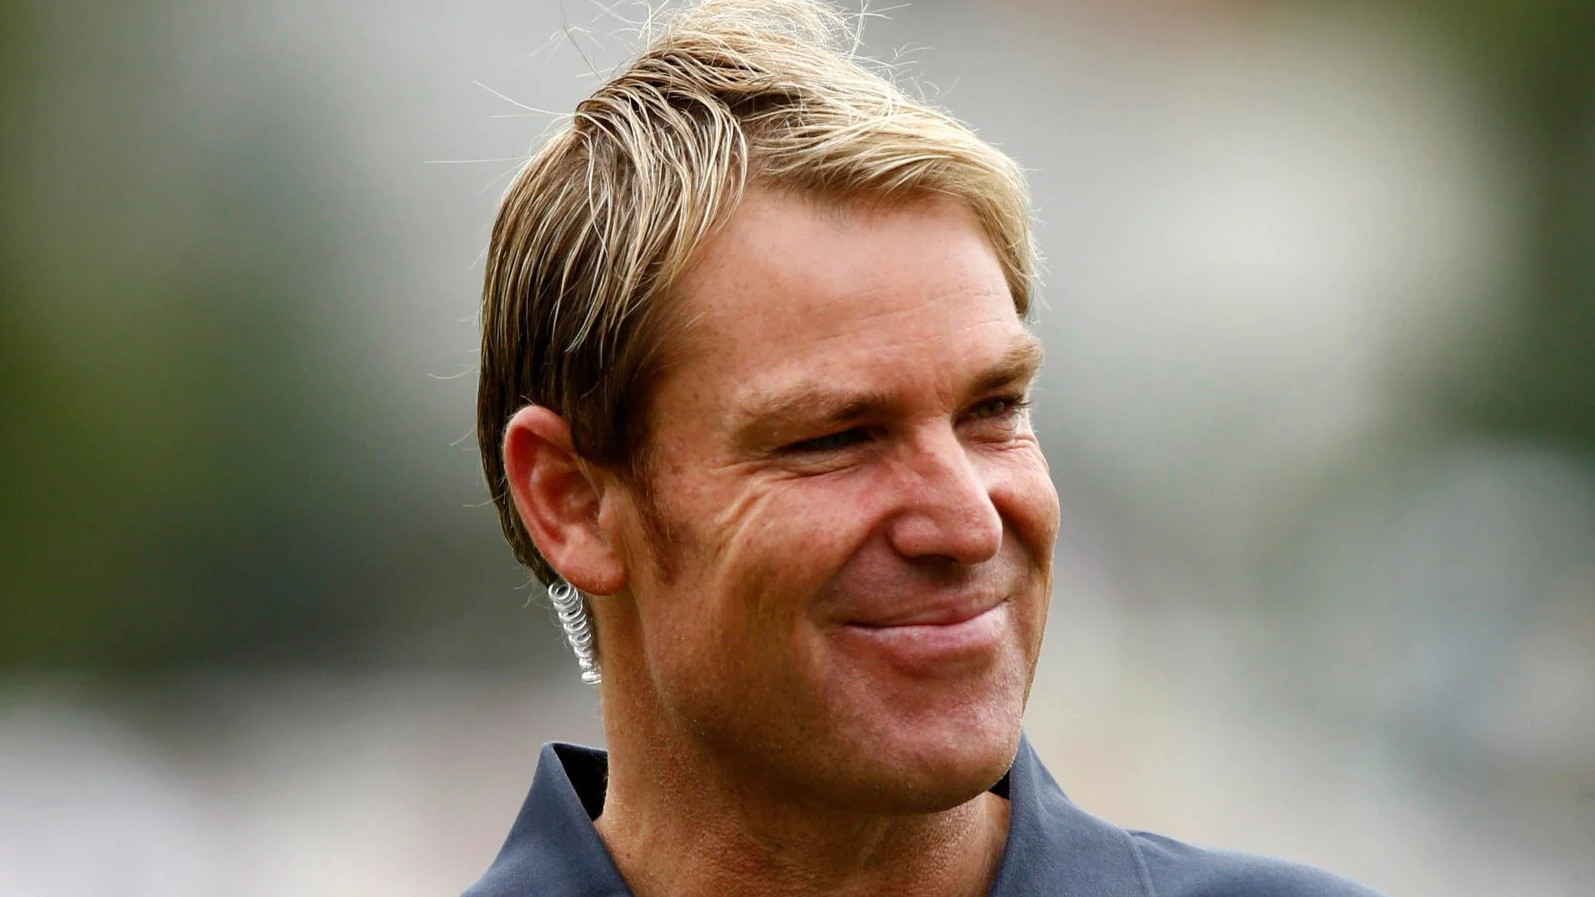 Thailand police reveals Shane Warne’s room had blood stains on floor and bath towels- Report